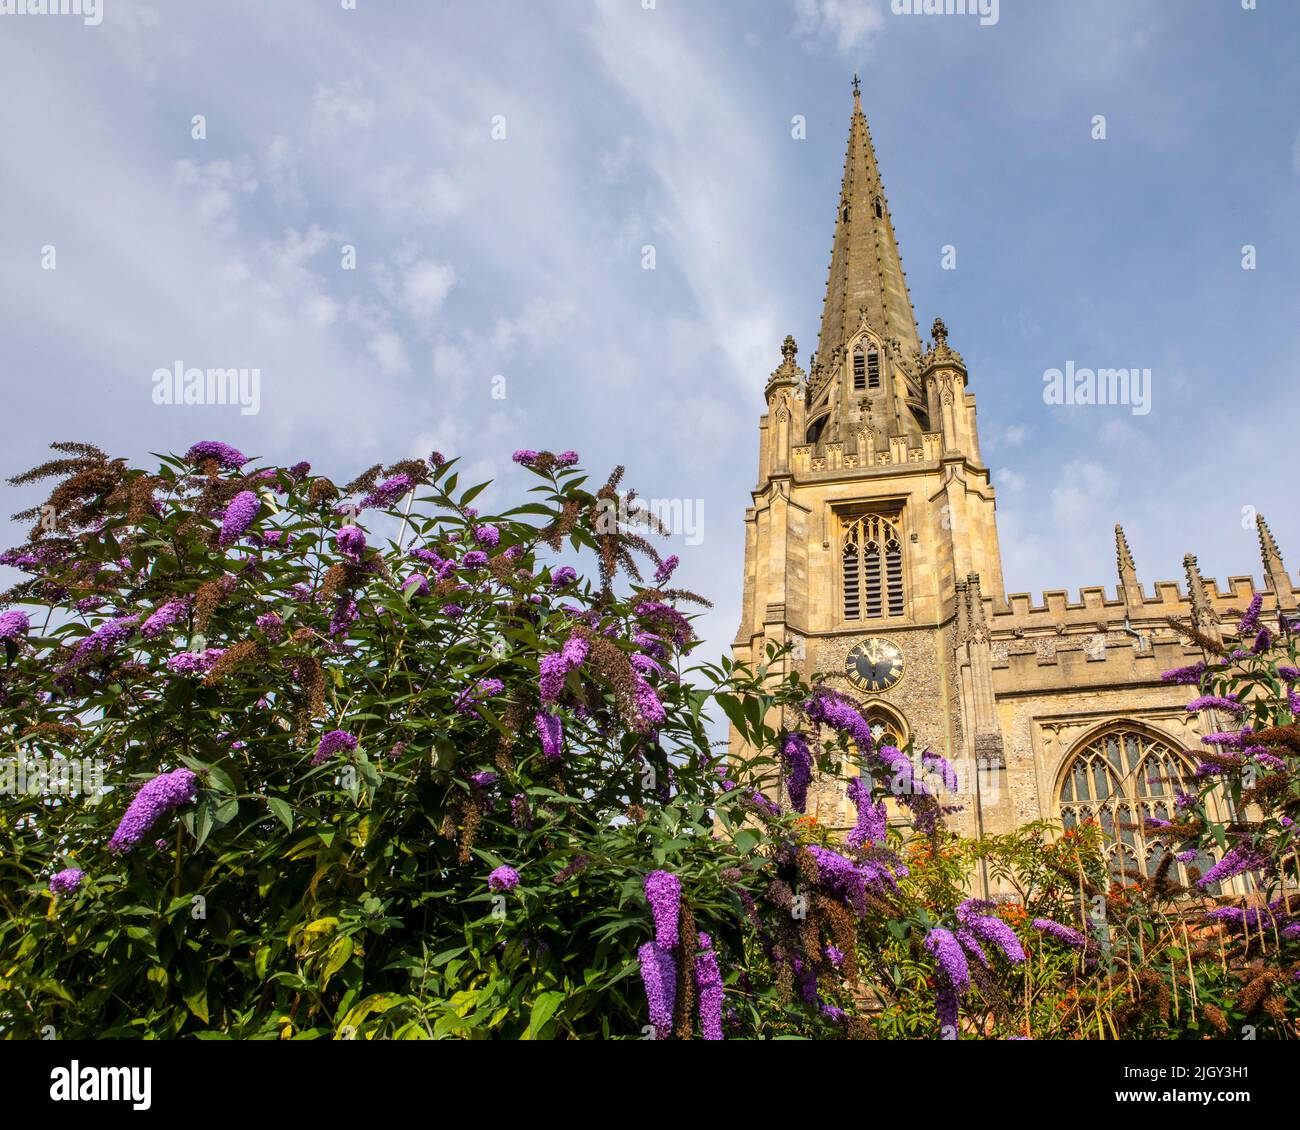 The historic St. Marys church, also known as the Church of St. Mary the Virgin, in the beautiful market town of Saffron Walden in Essex, UK. Stock Photo